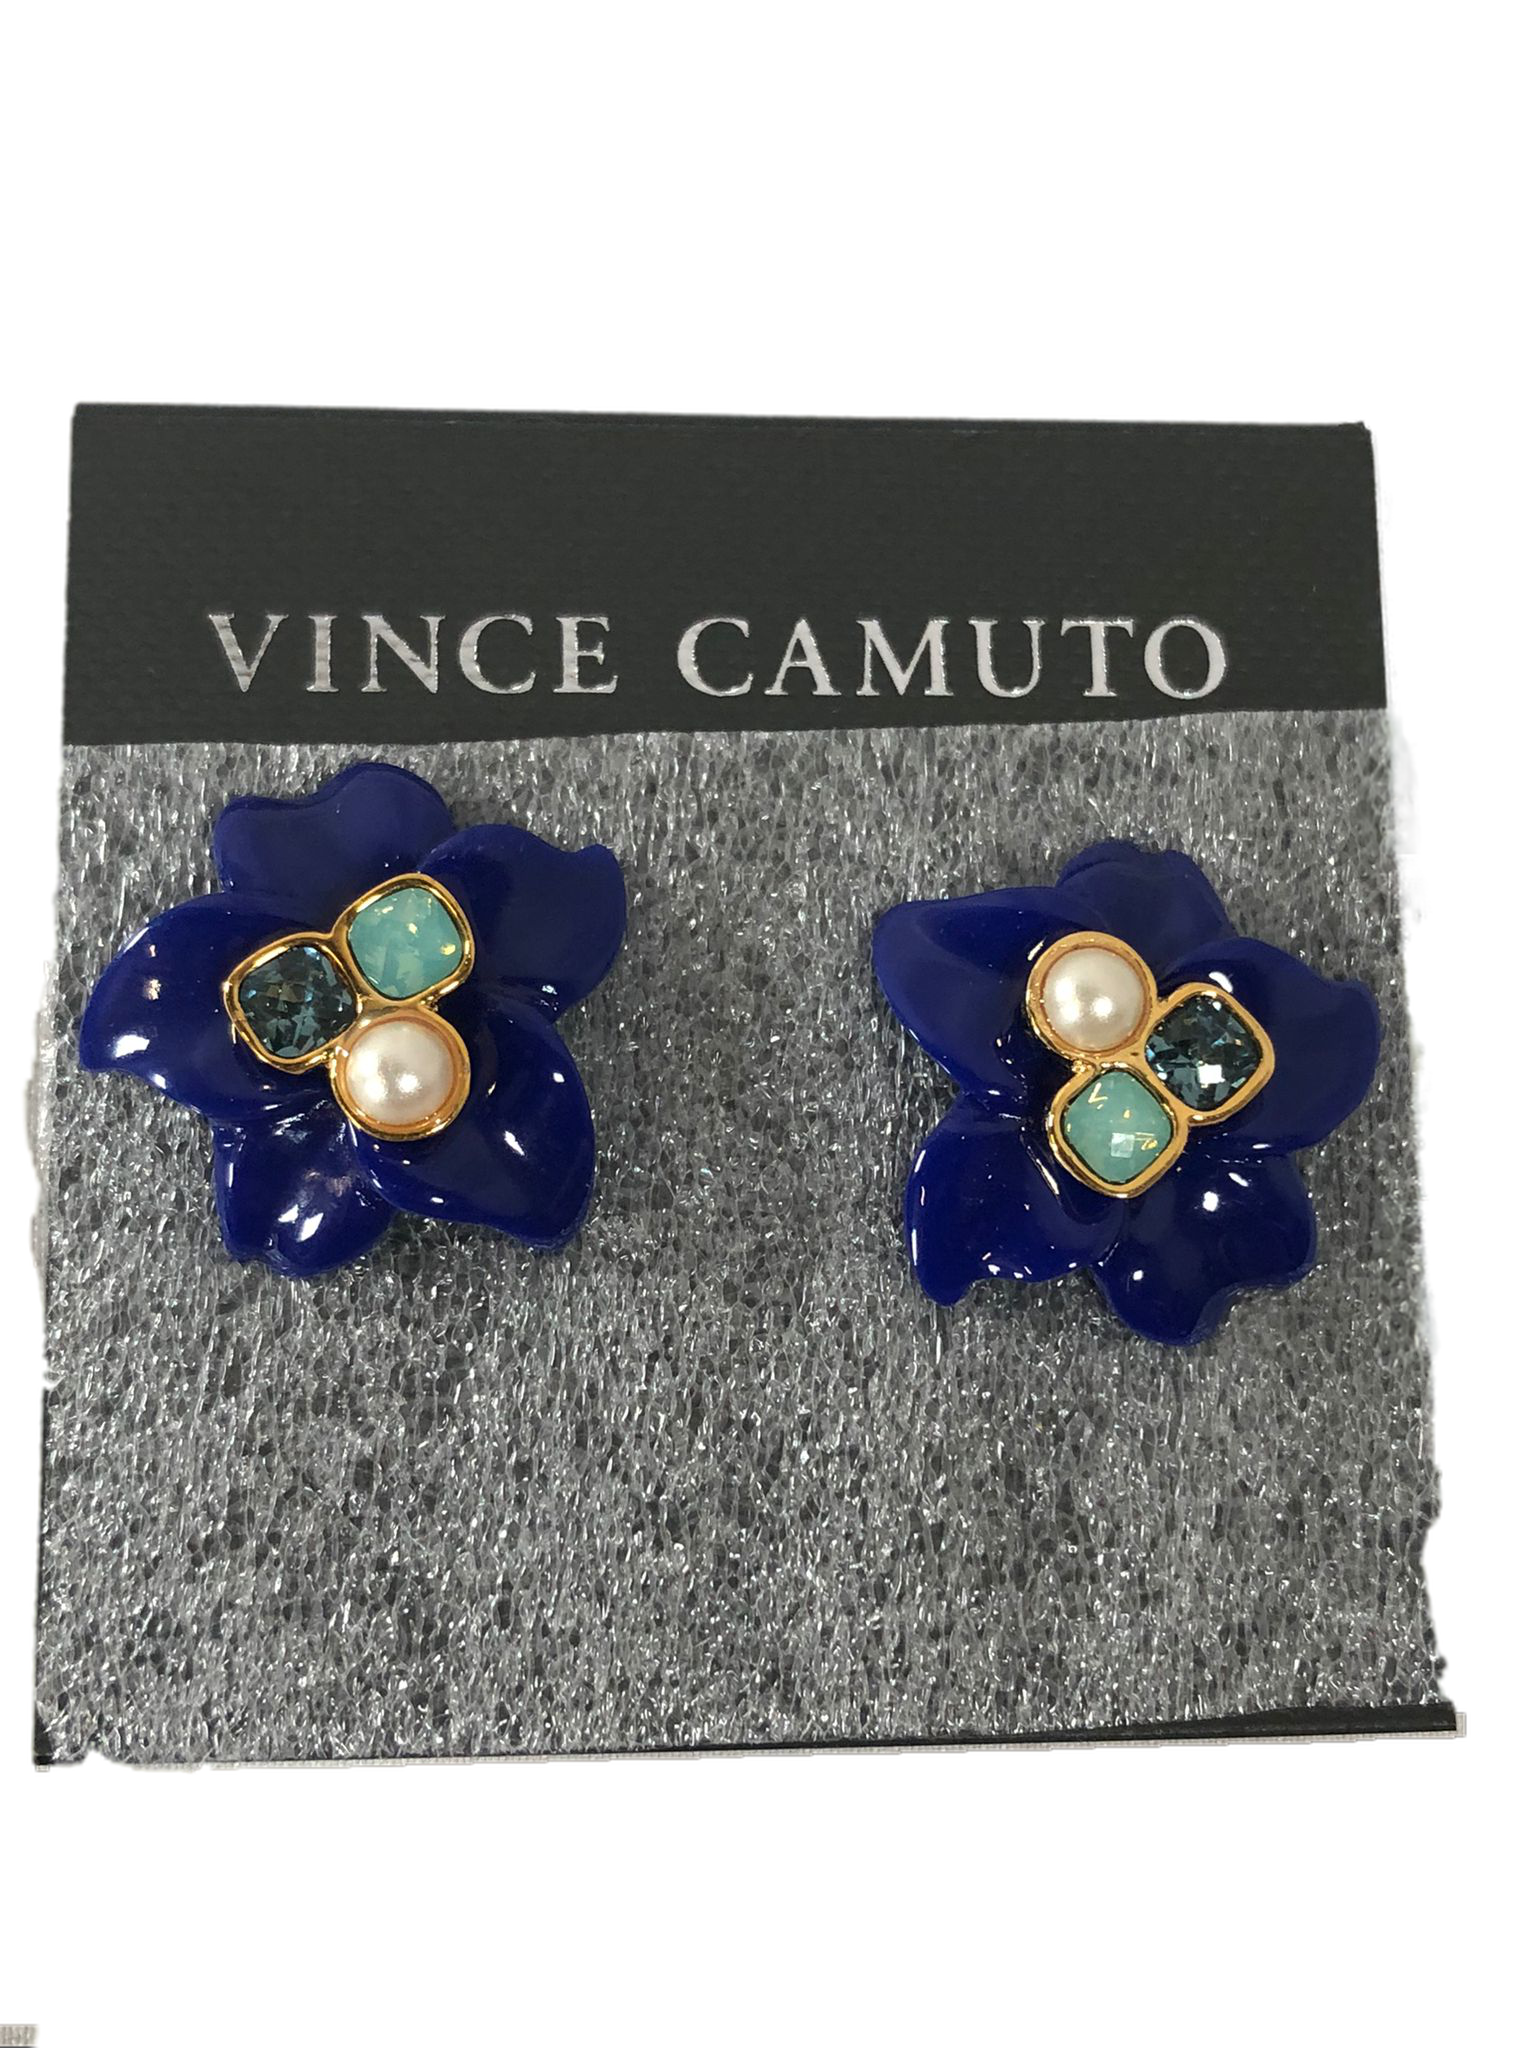 Vince Camuto Drama Stud Earrings Gold/Lapis/Ivory Pearl/Indian Sapphire/Pacific Opal One Size